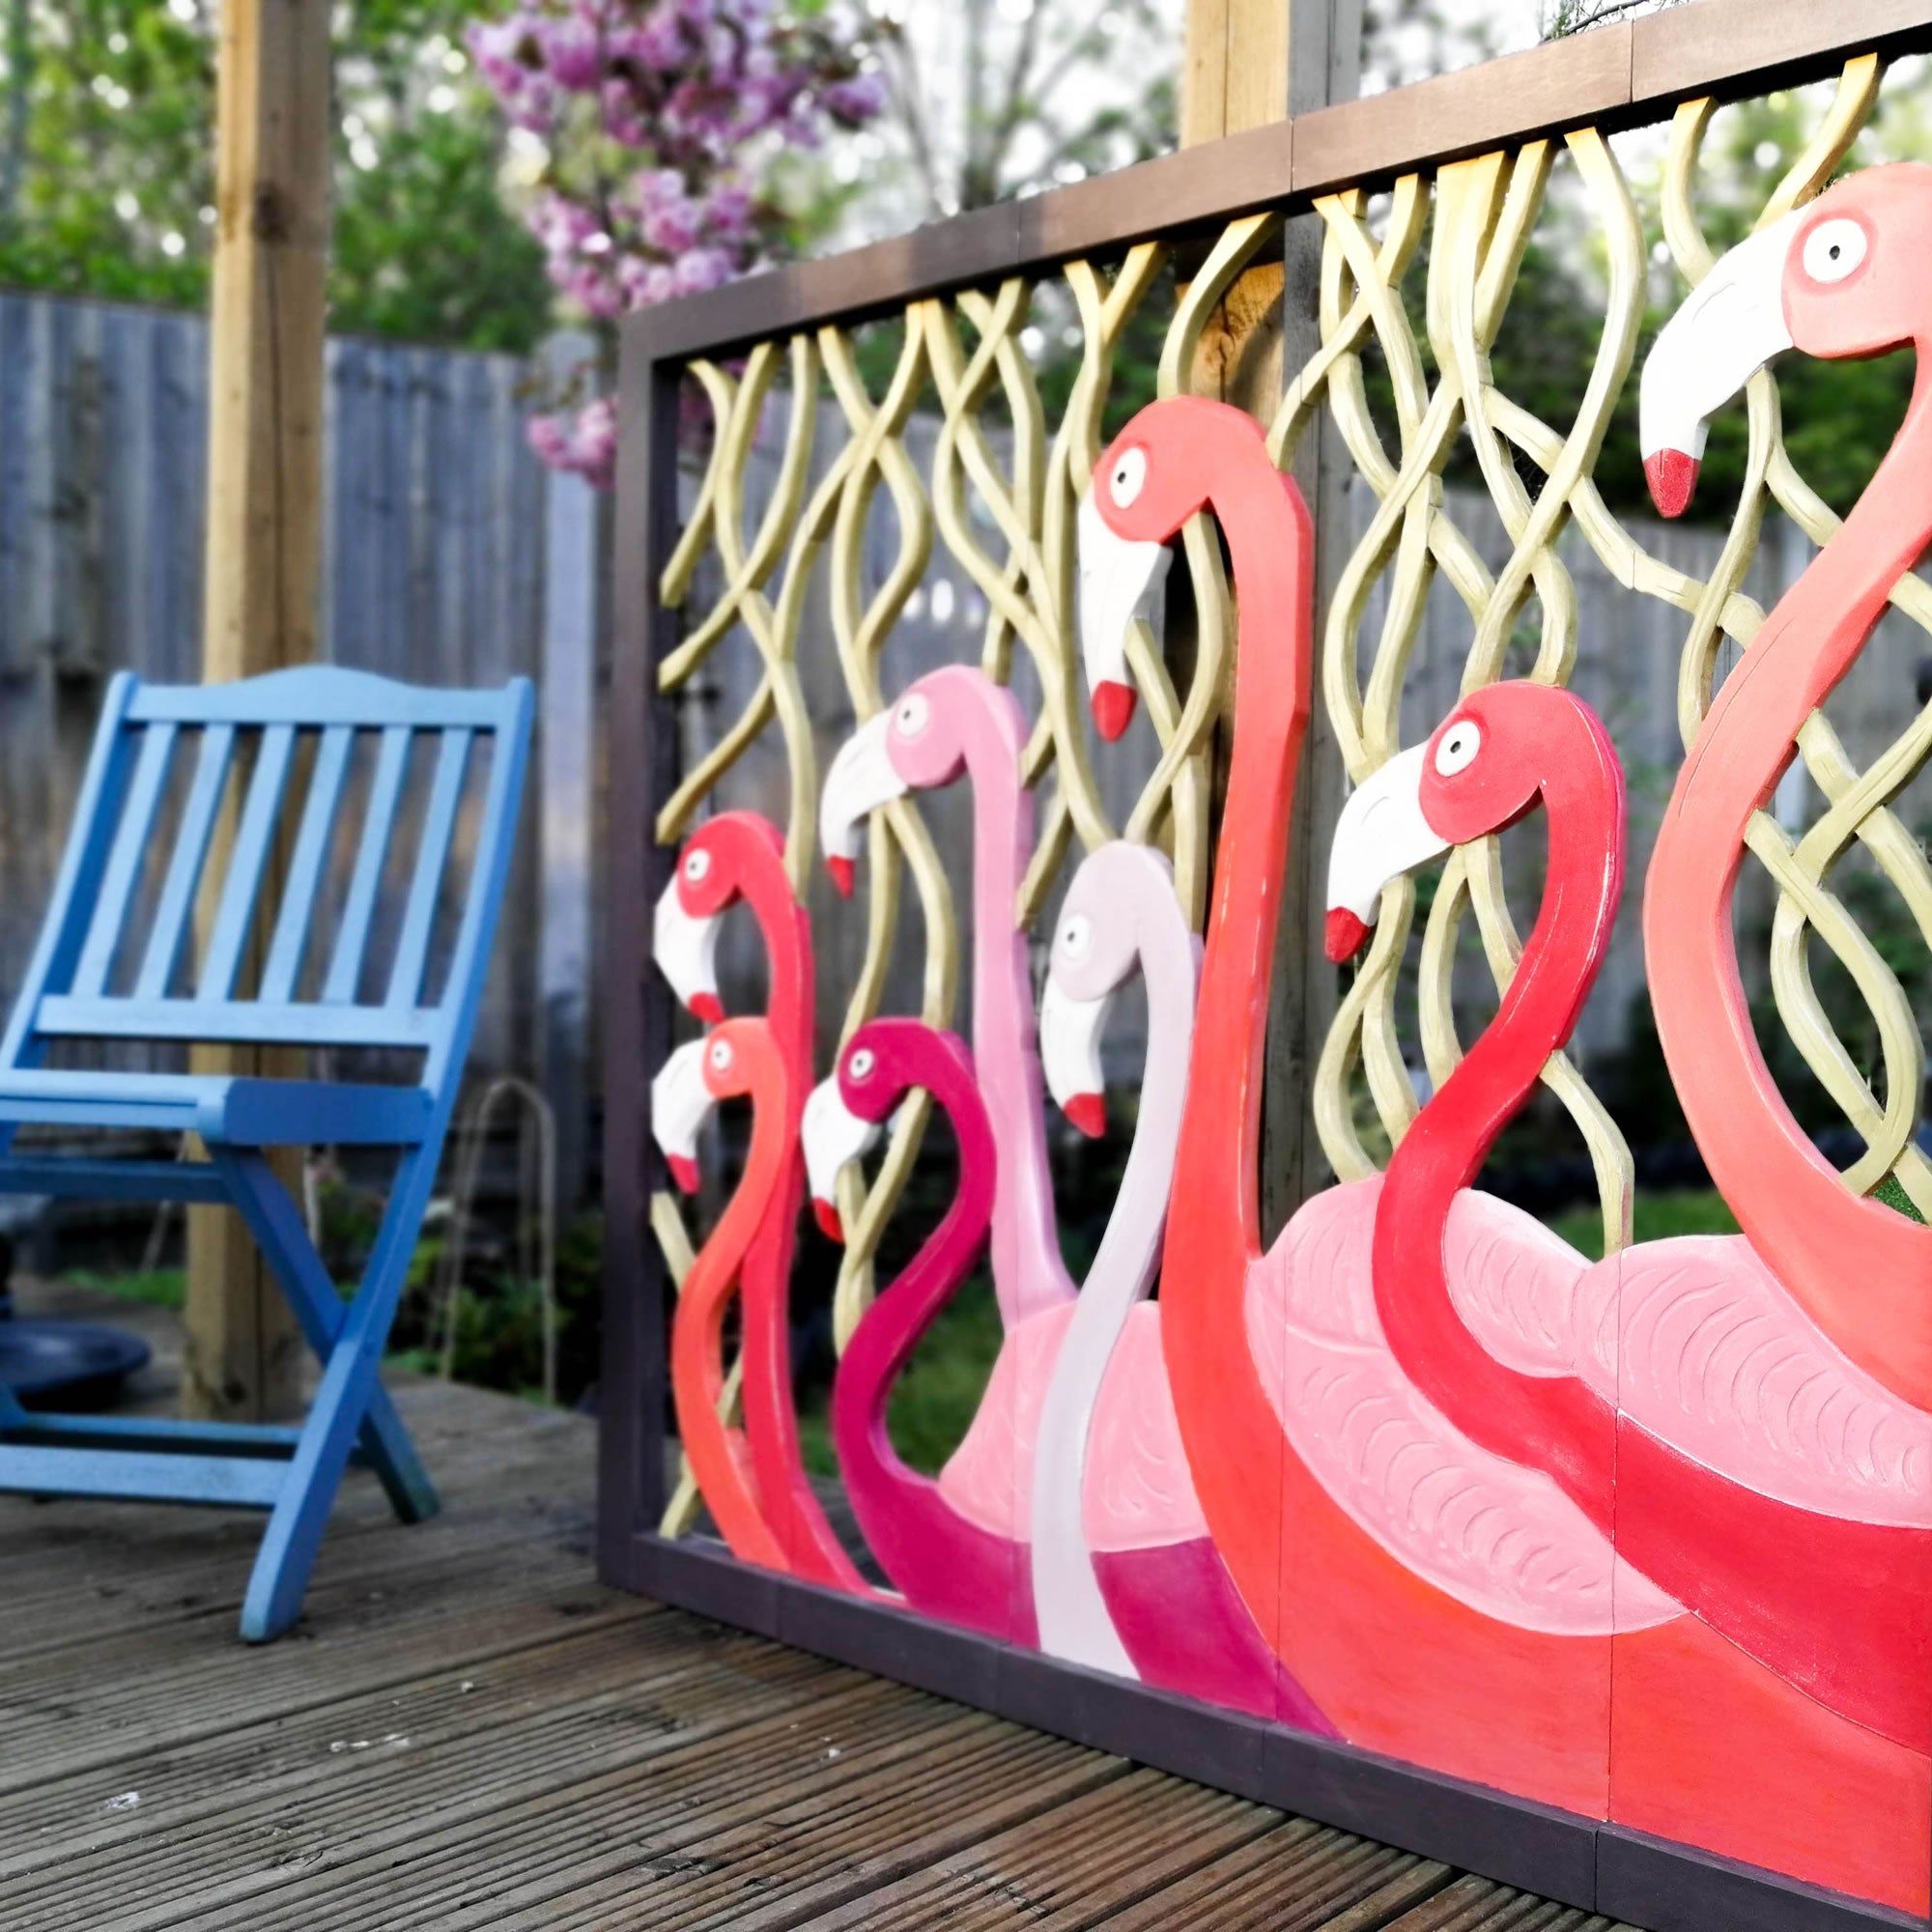 Carved Painted Wooden Wall Art - Large Headboard Decorative Flamingos